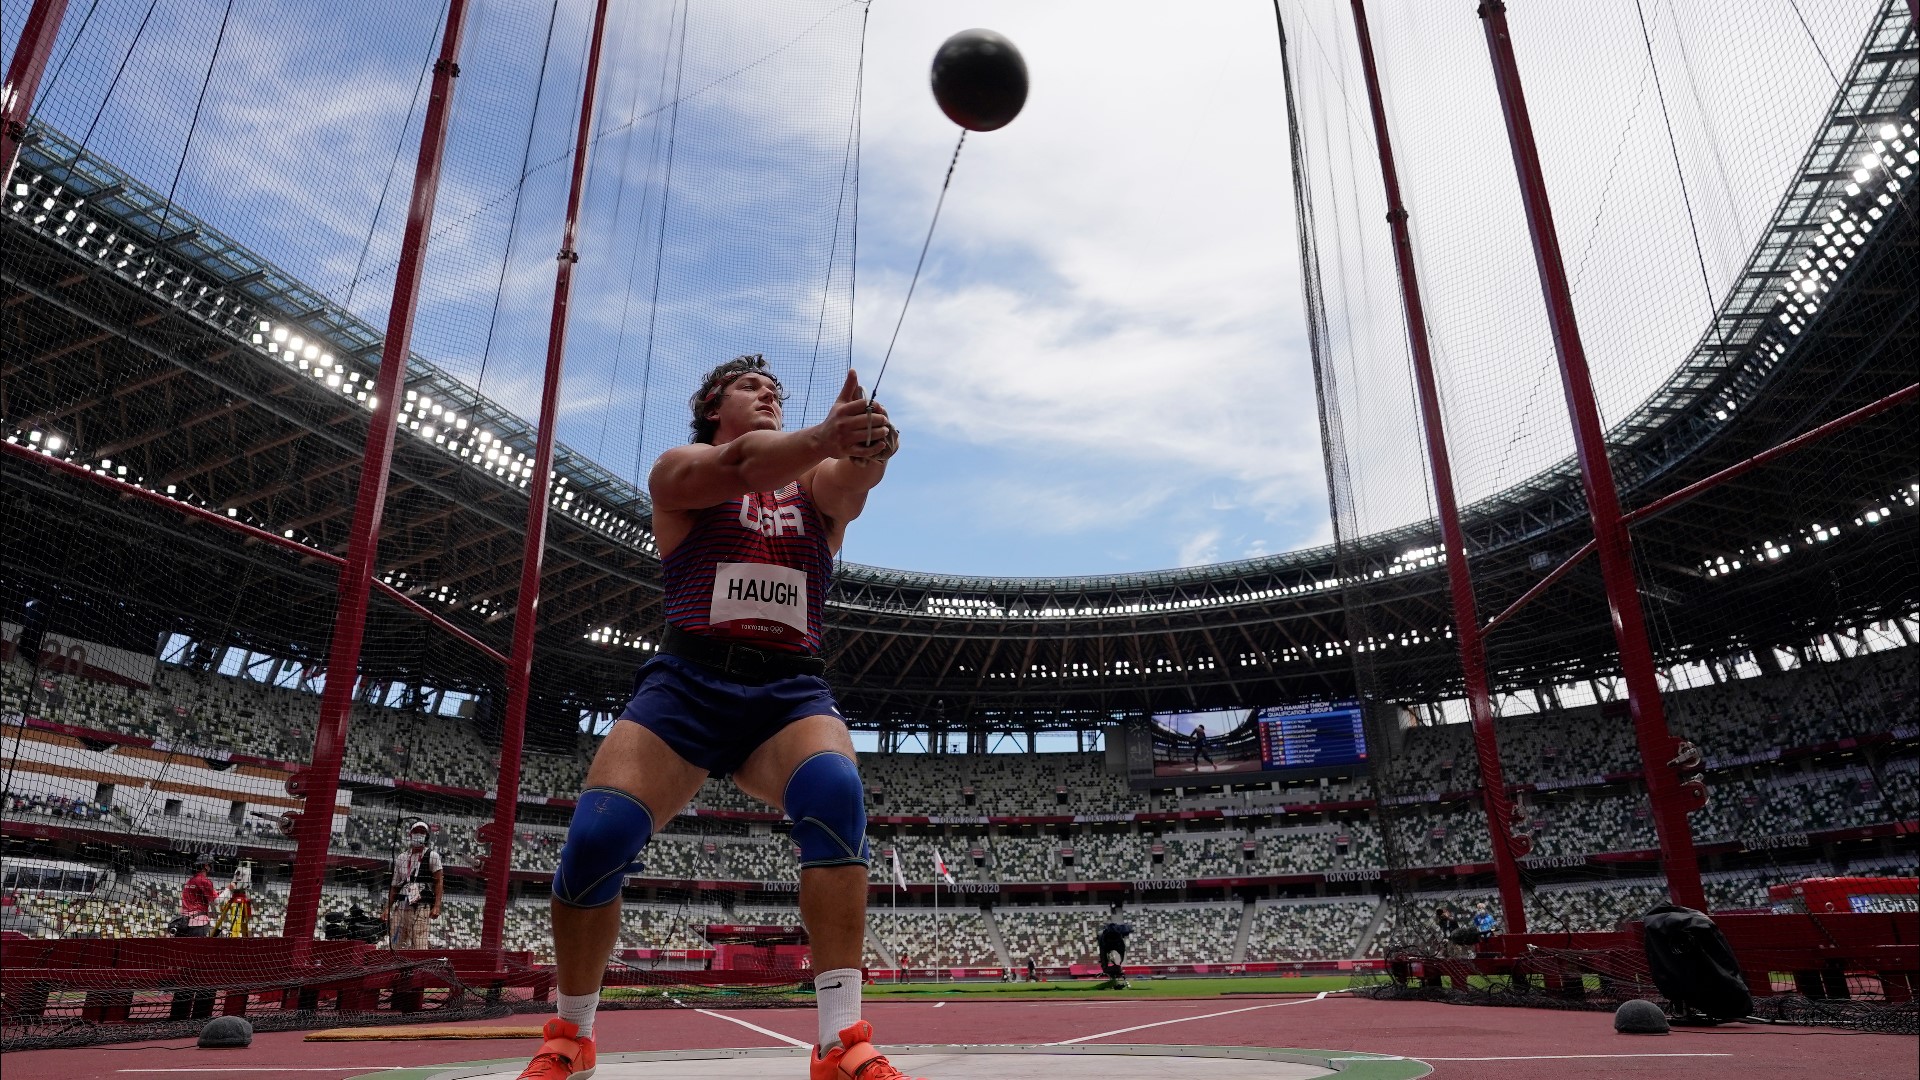 Olympic Hammer Thrower from Atlanta Daniel Haugh qualified for the gold medal final at the Tokyo Olympics.